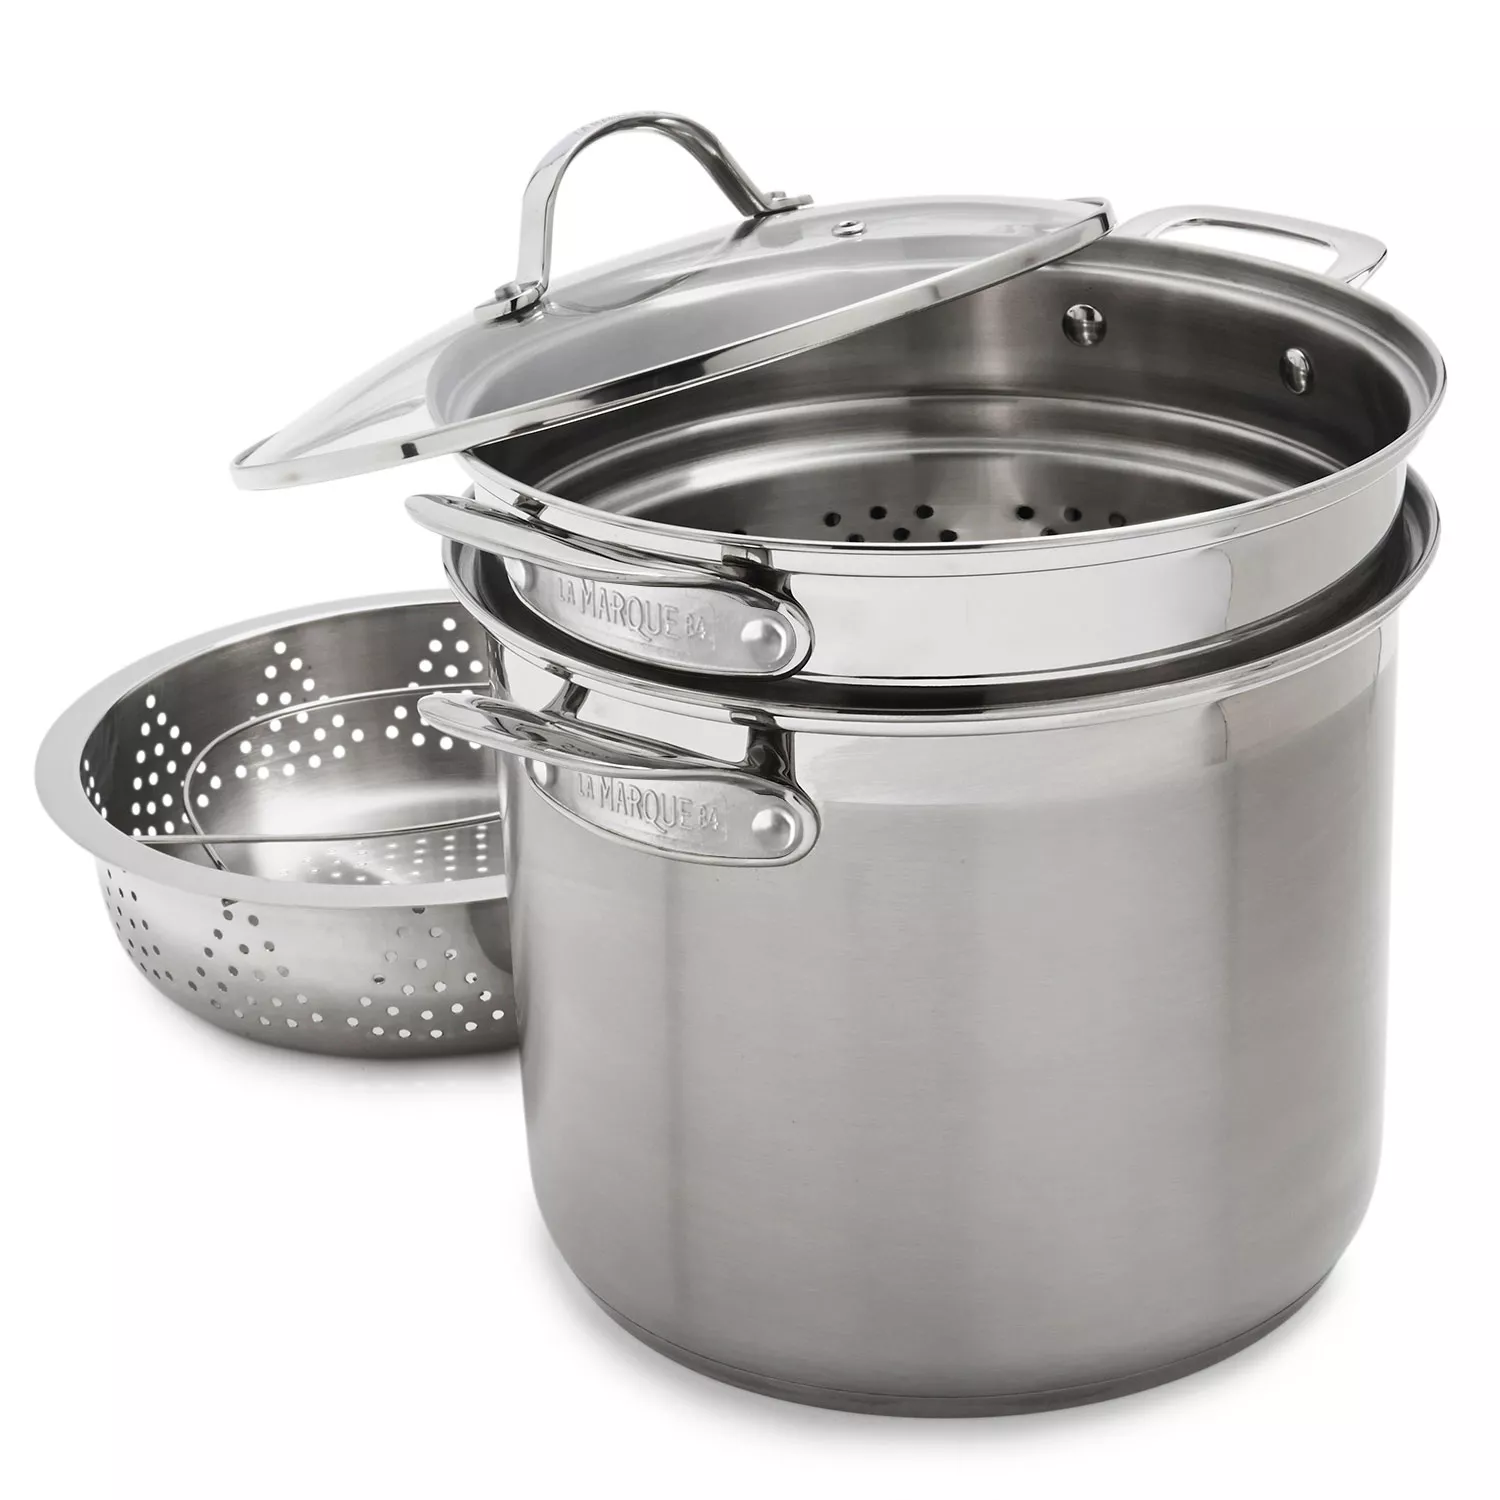 La Marque Stockpot with Pasta and Steamer Insert, with lid, 12 QT.